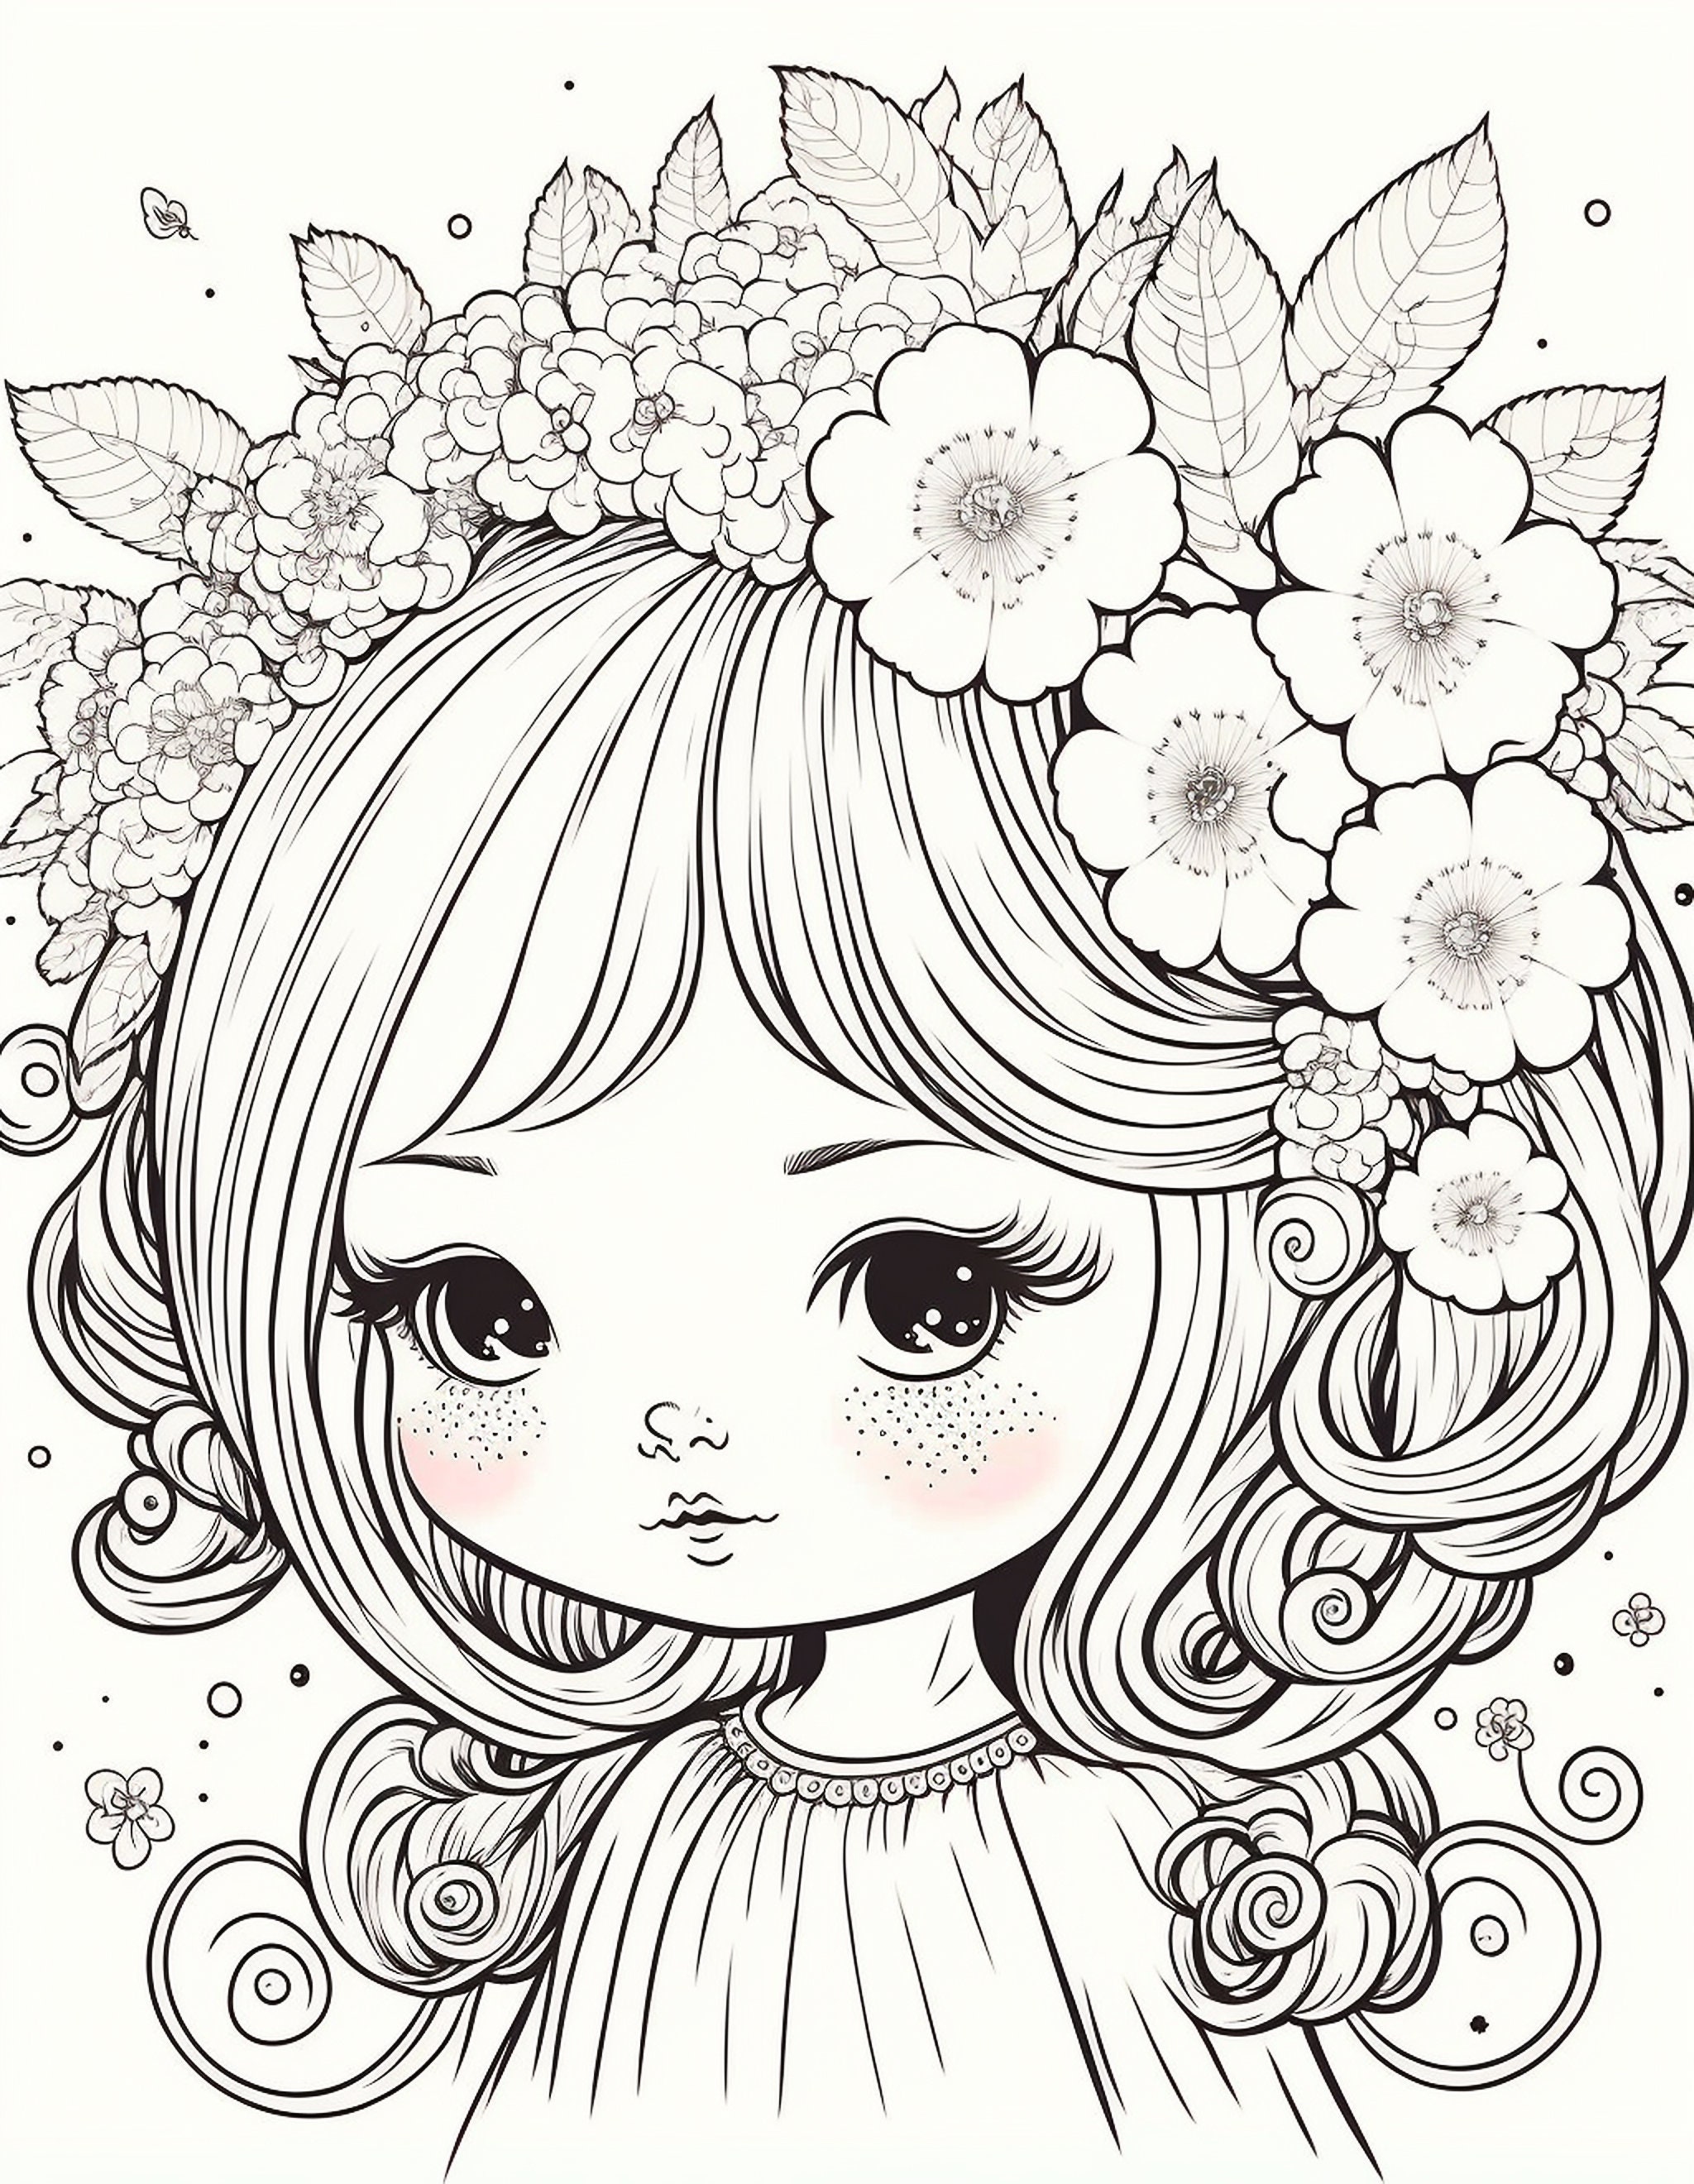 Beautiful girls with flowers coloring pages girl printable book digital download not a physical product